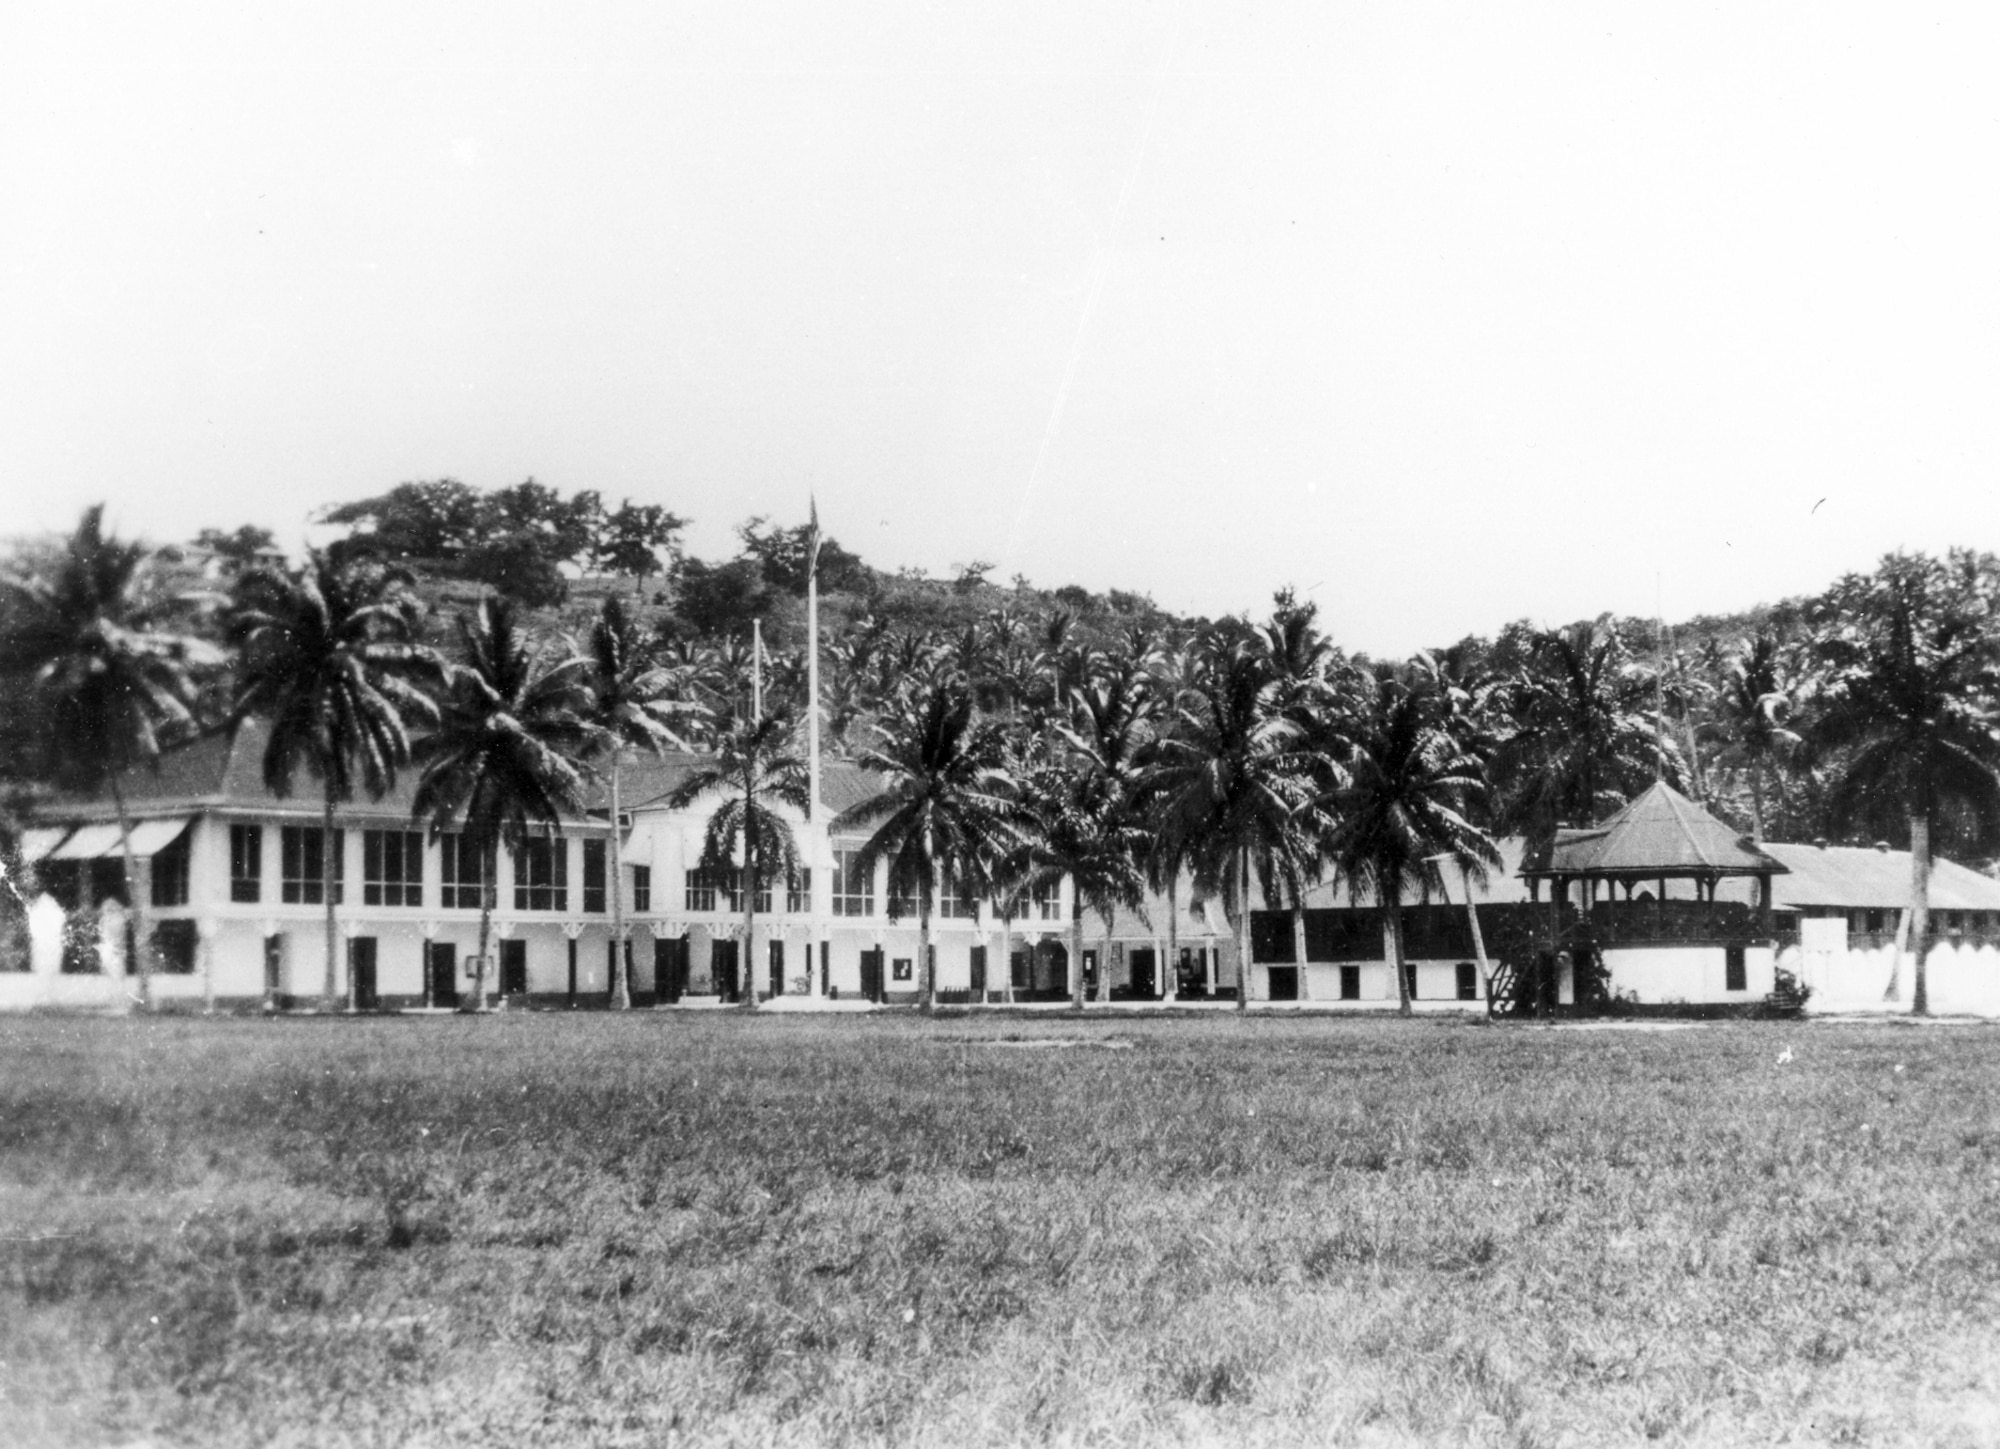 A view of the Governor's Palace across the Plaza de Espana. (Courtesy photo provided by War in the Pacific NHP)